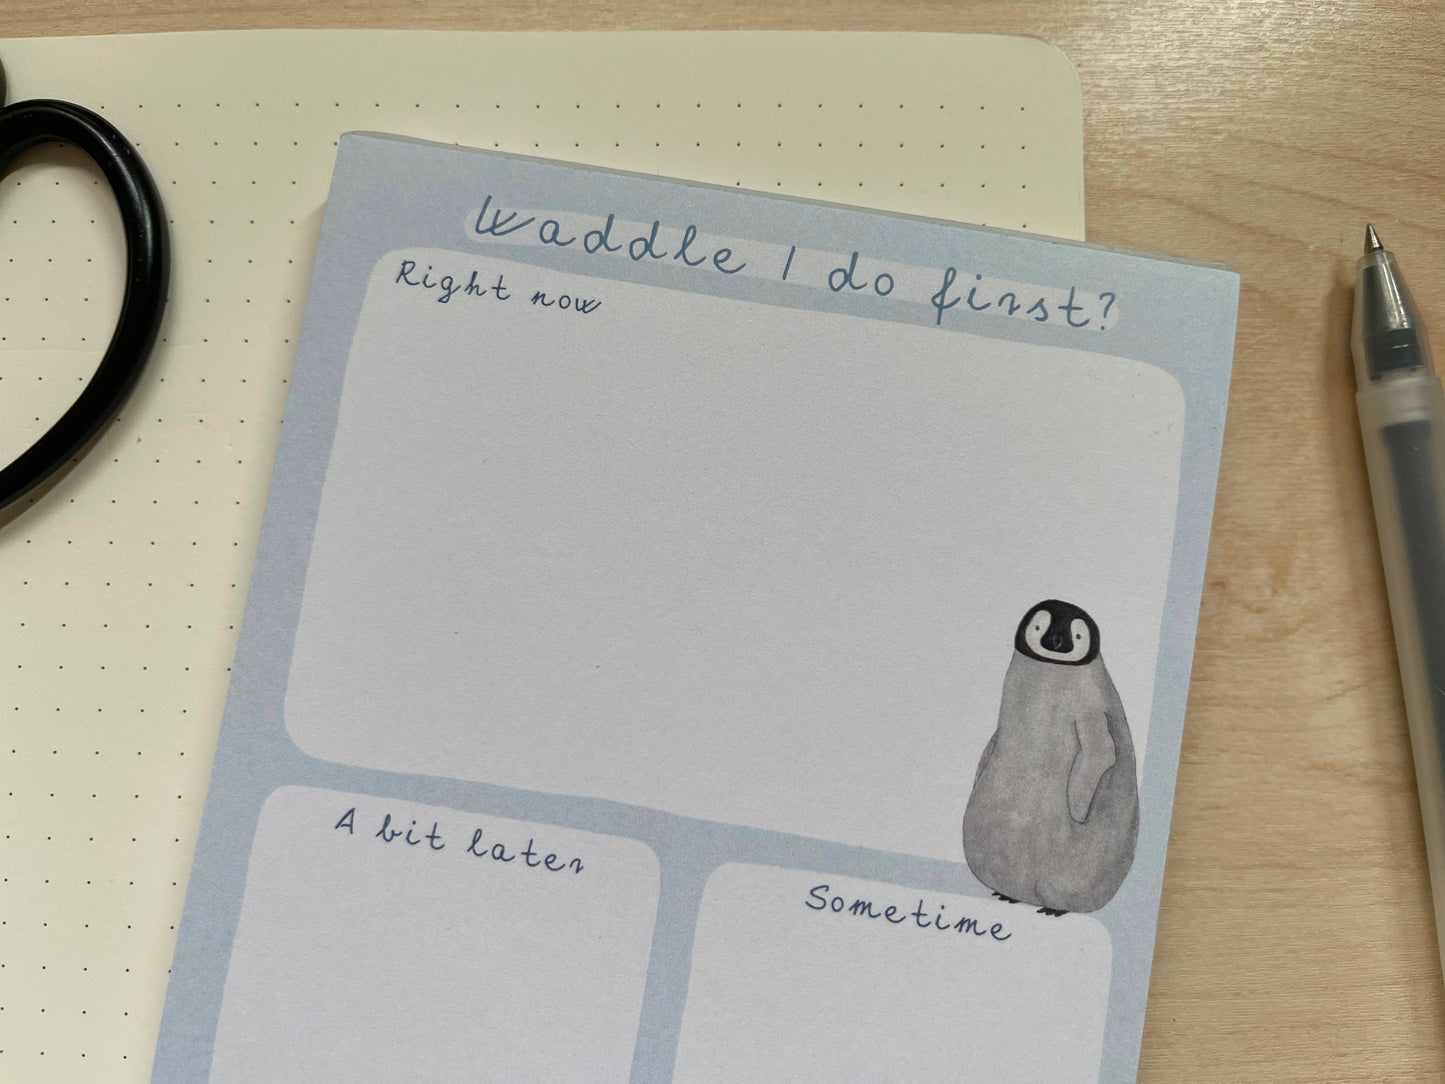 Waddle I do first? A6 Notepad